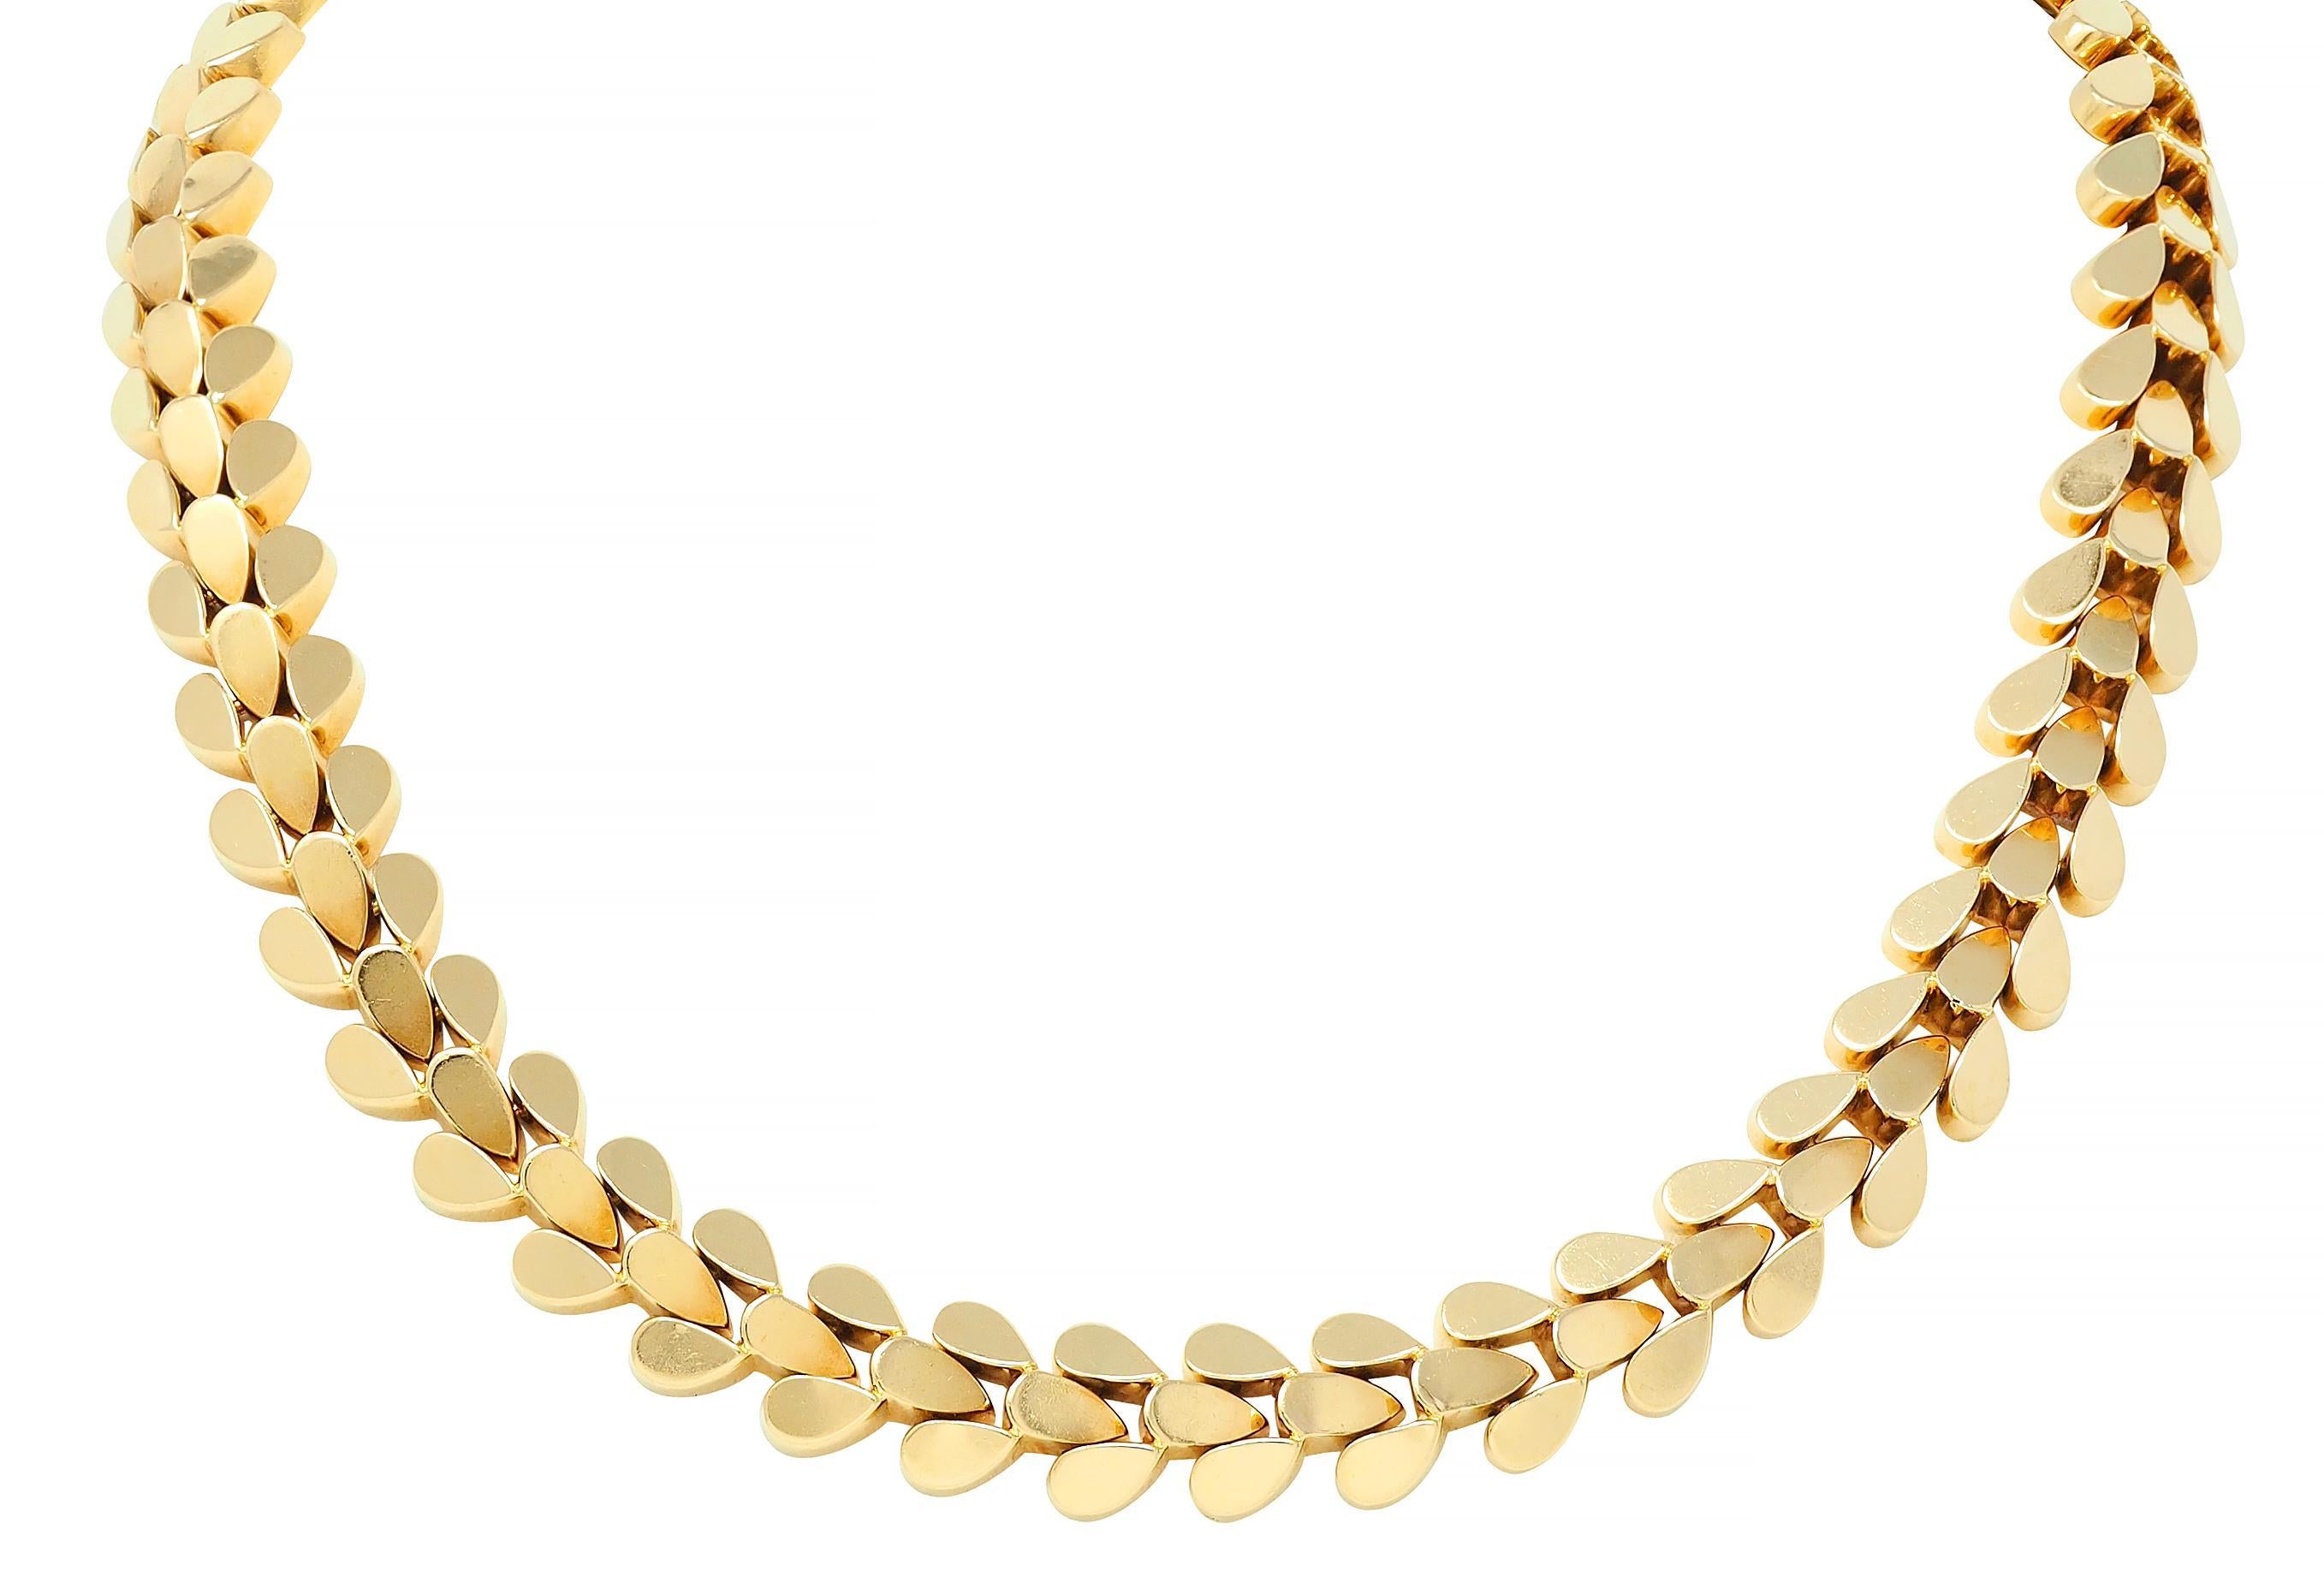 Cartier 1970's 18 Karat Yellow Gold Foliate Link Vintage Collar Necklace In Excellent Condition For Sale In Philadelphia, PA